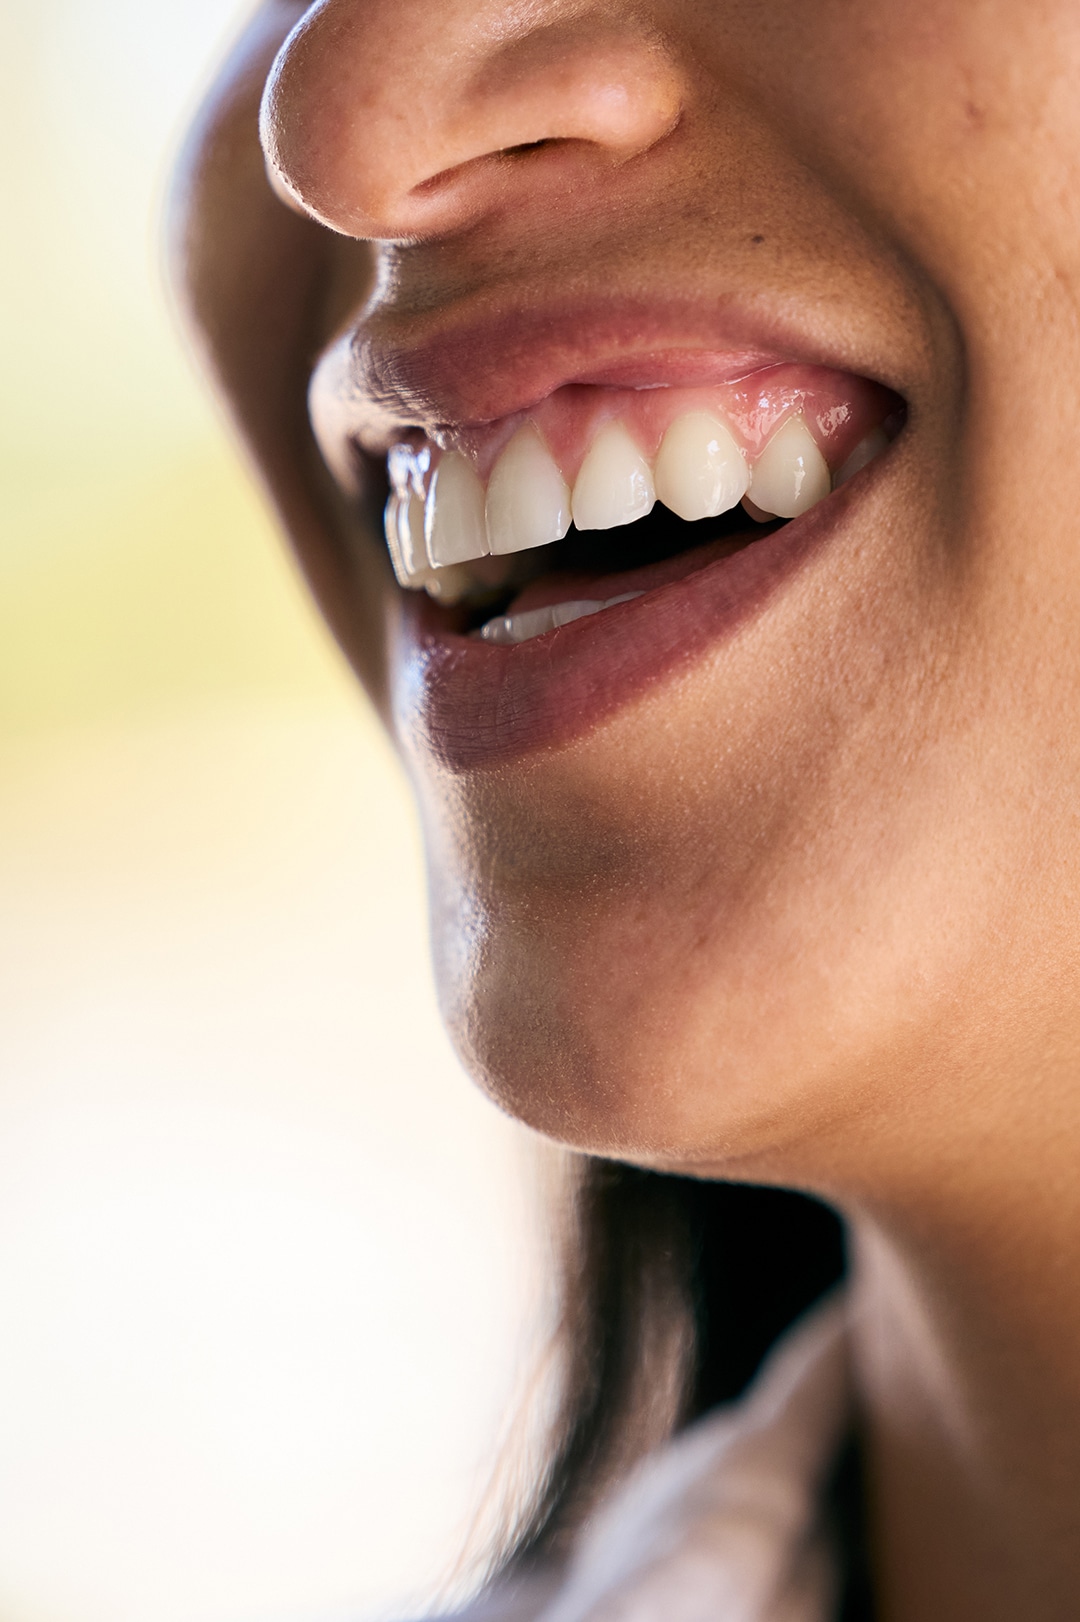 A close up of a young woman's smile after dental appointment at esteem dental studio